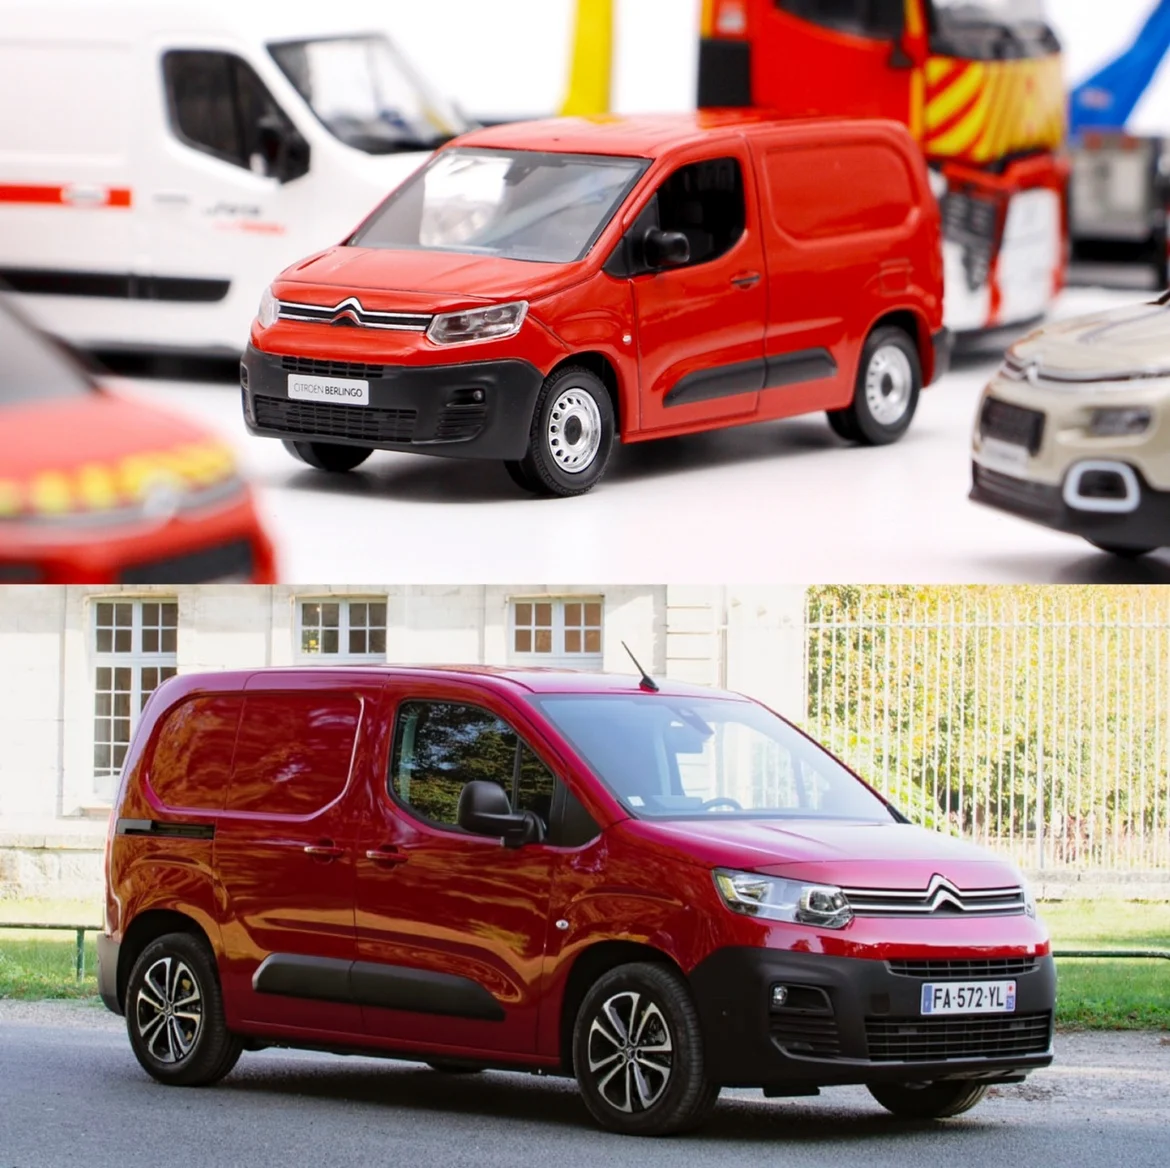 

Norev 1:43 For Citreon Berlingo Van Red Limited Edition Simulation Resin Alloy Static Car Model Toys Gift